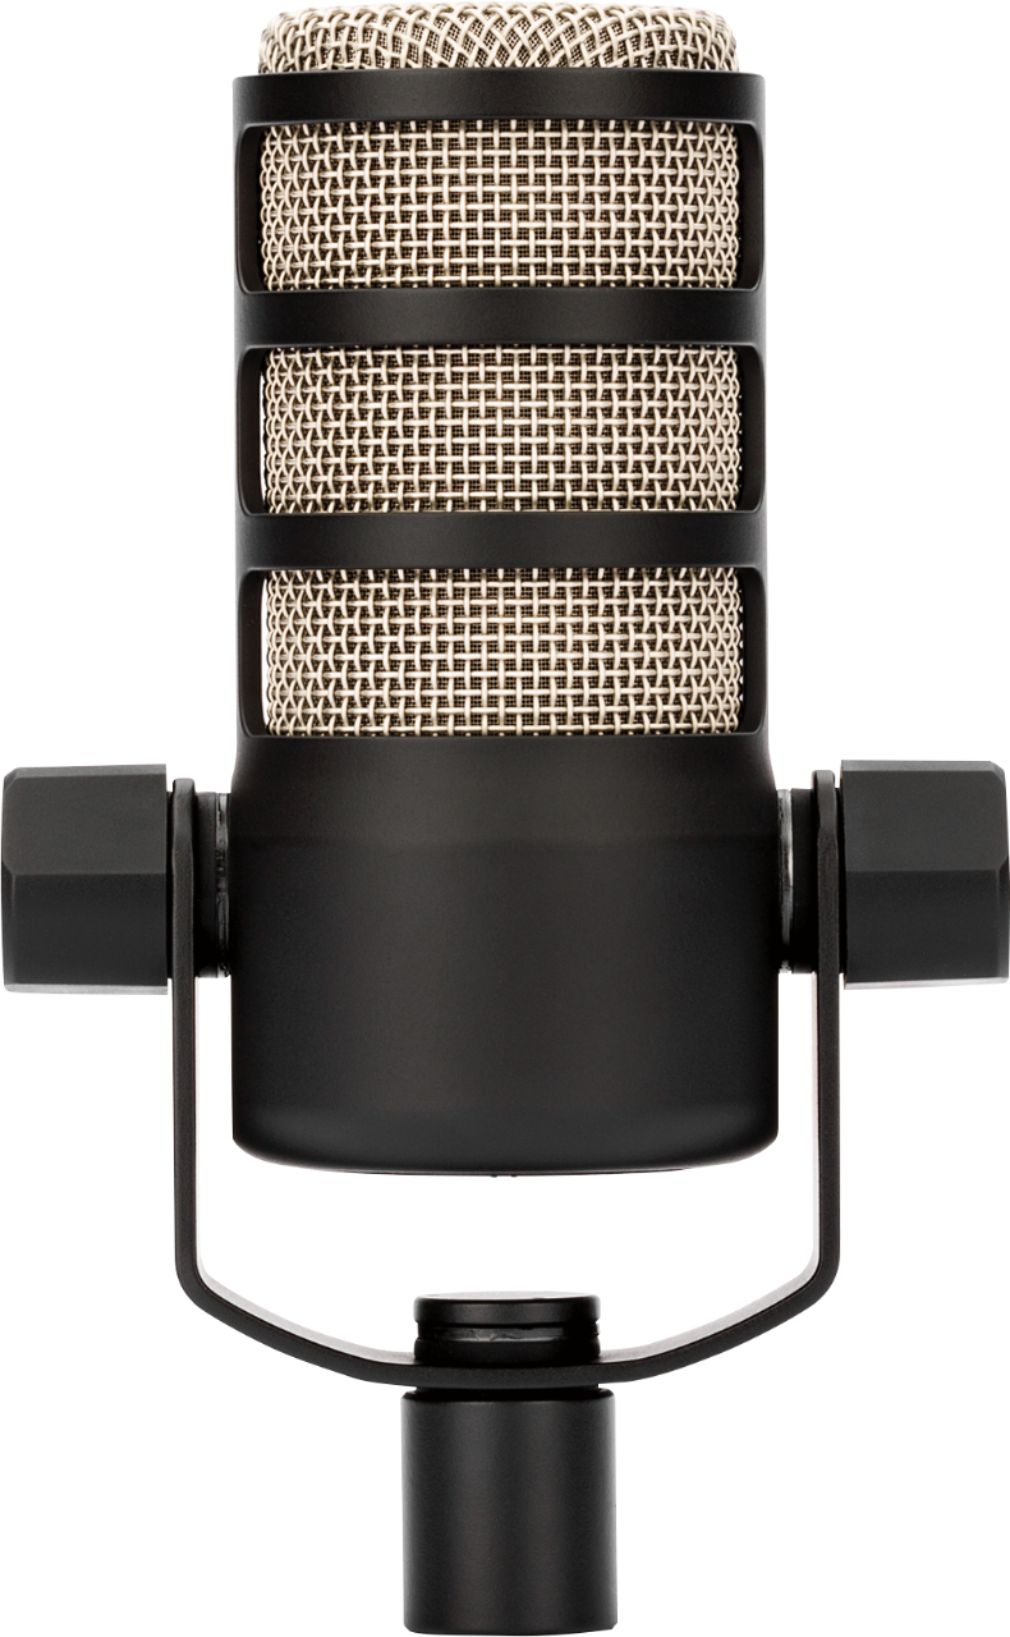 Rode Microphones PodMic Podcasting XLR Dynamic Microphone - Black - Micro  Center